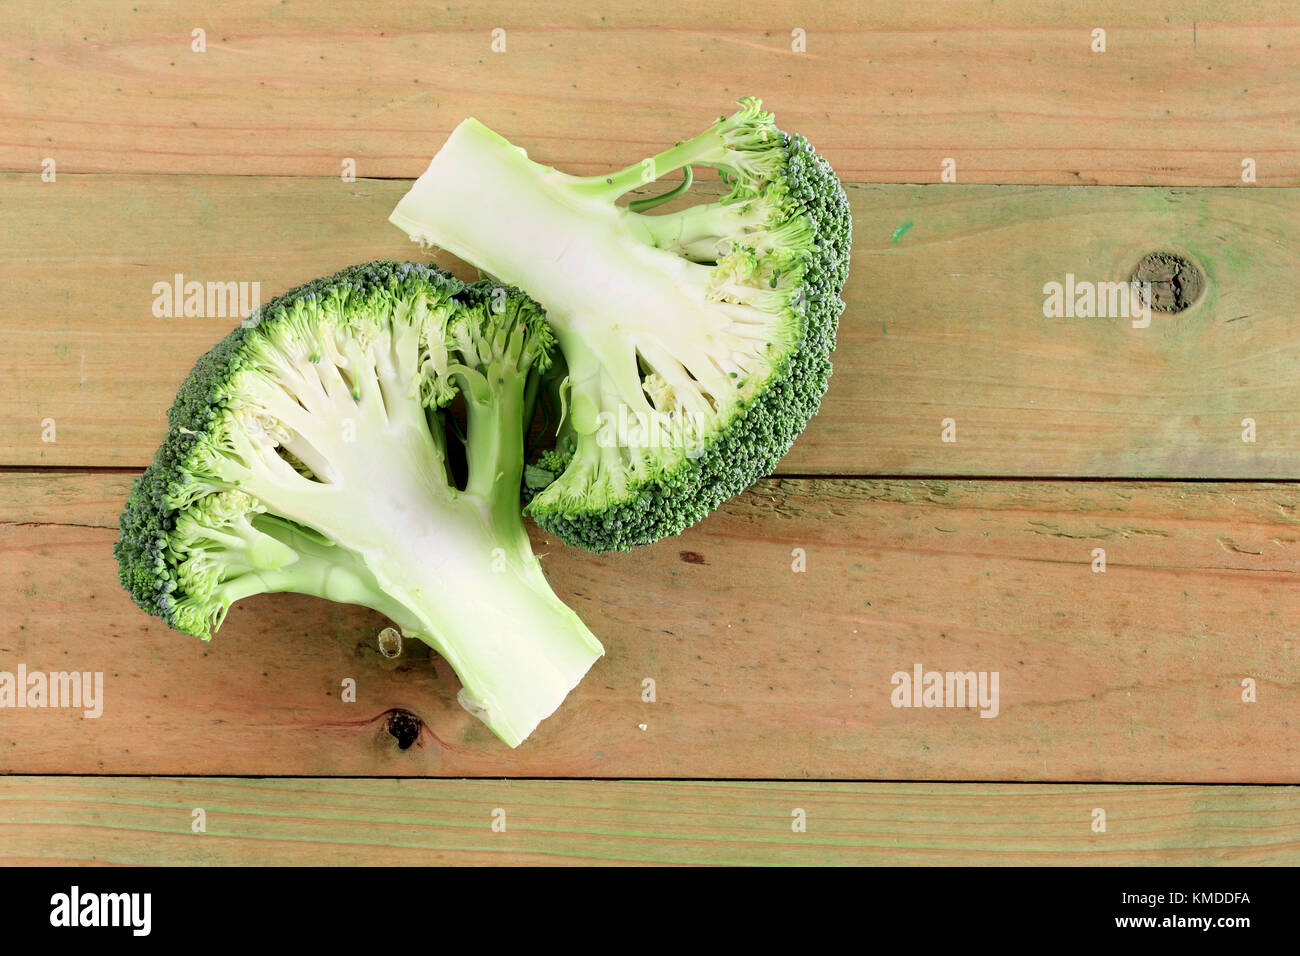 Broccoli on Wooden Background Stock Photo